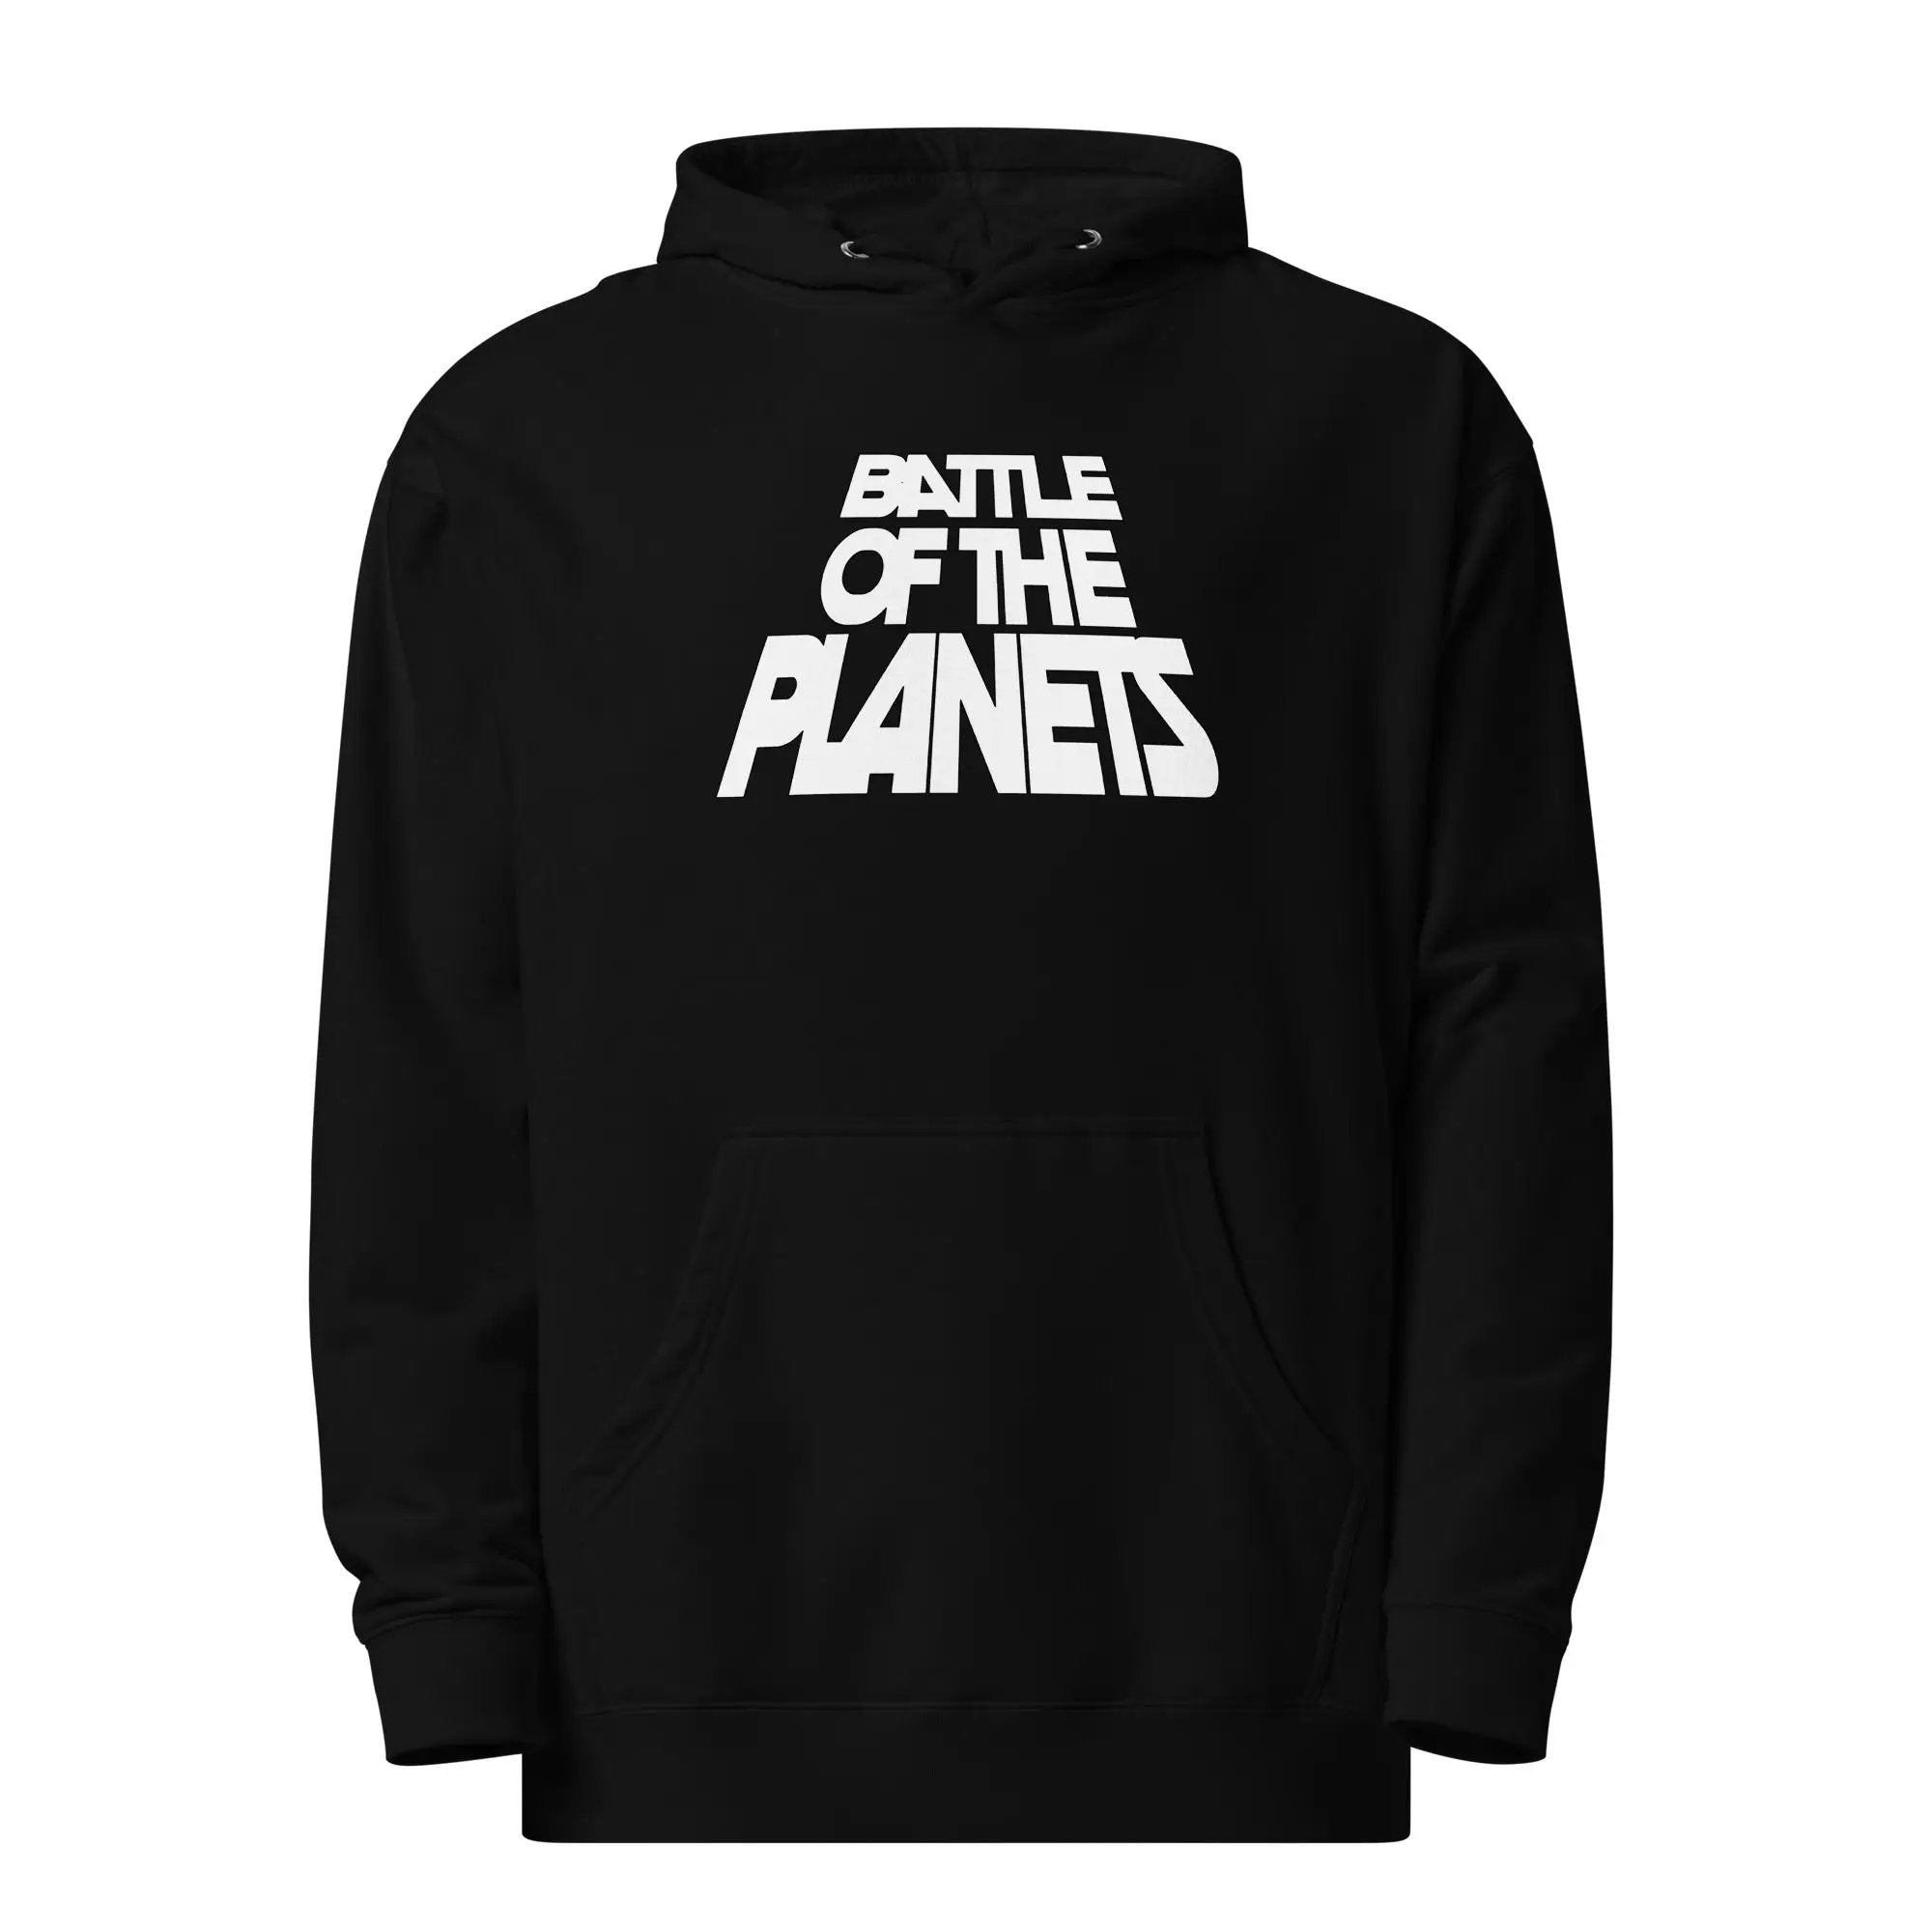 Battle Of The Planets Unisex midweight hoodie